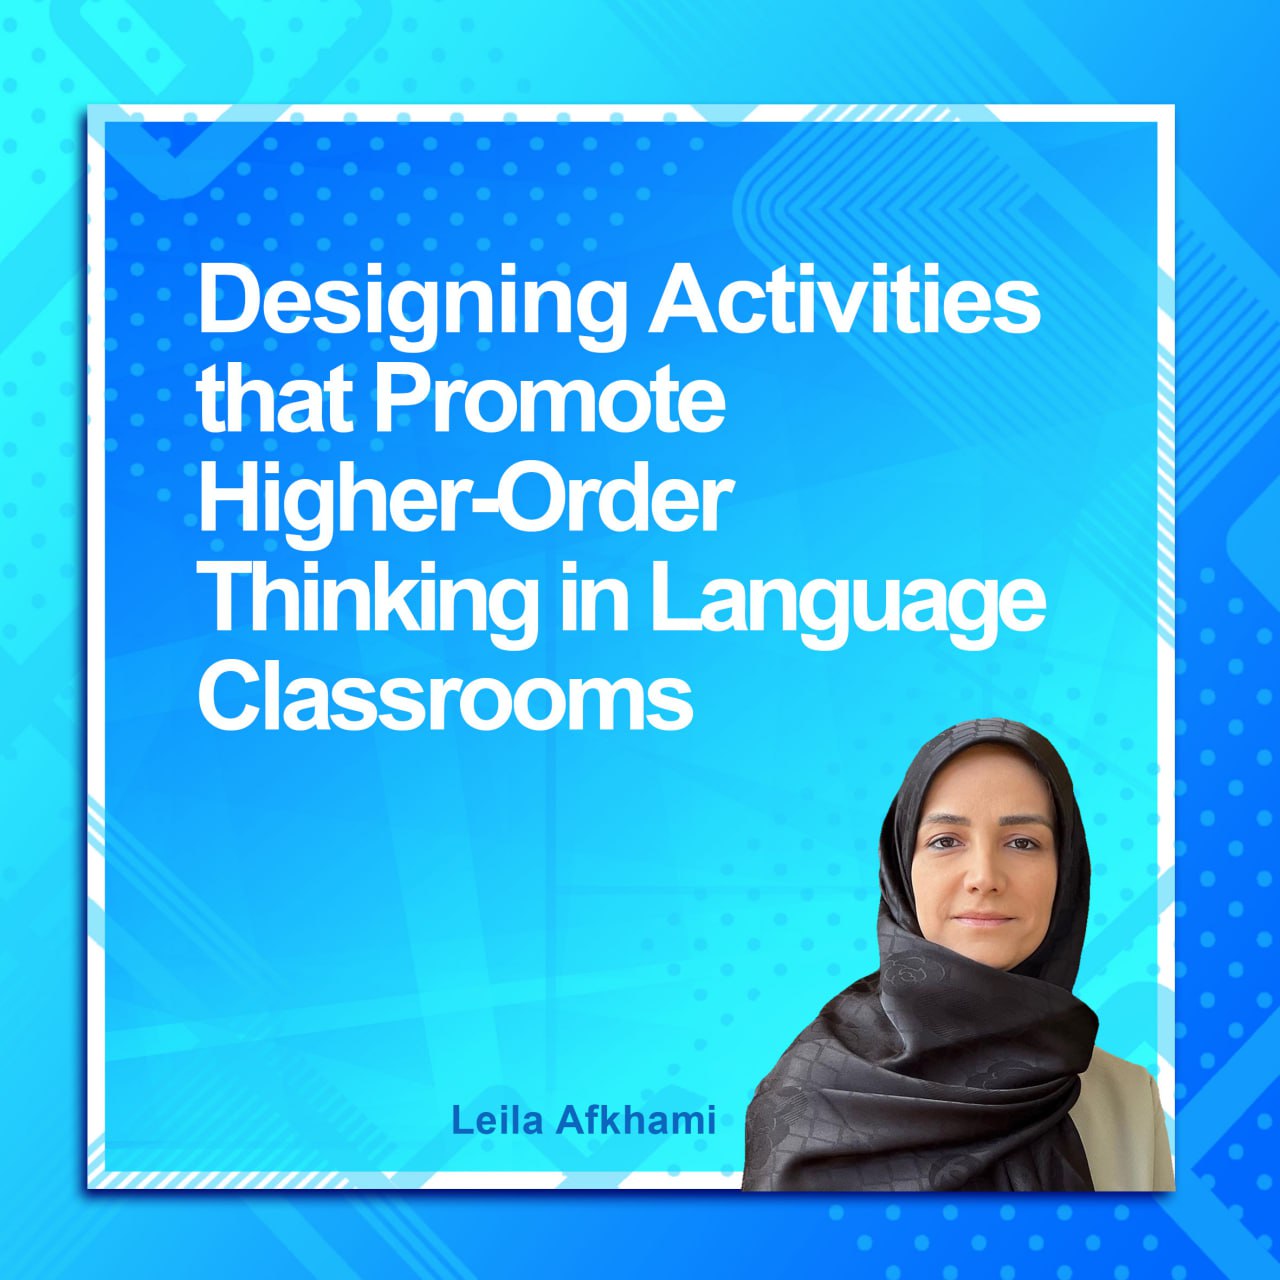 Designing Activities that Promote Higher-Order Thinking in Language Classrooms